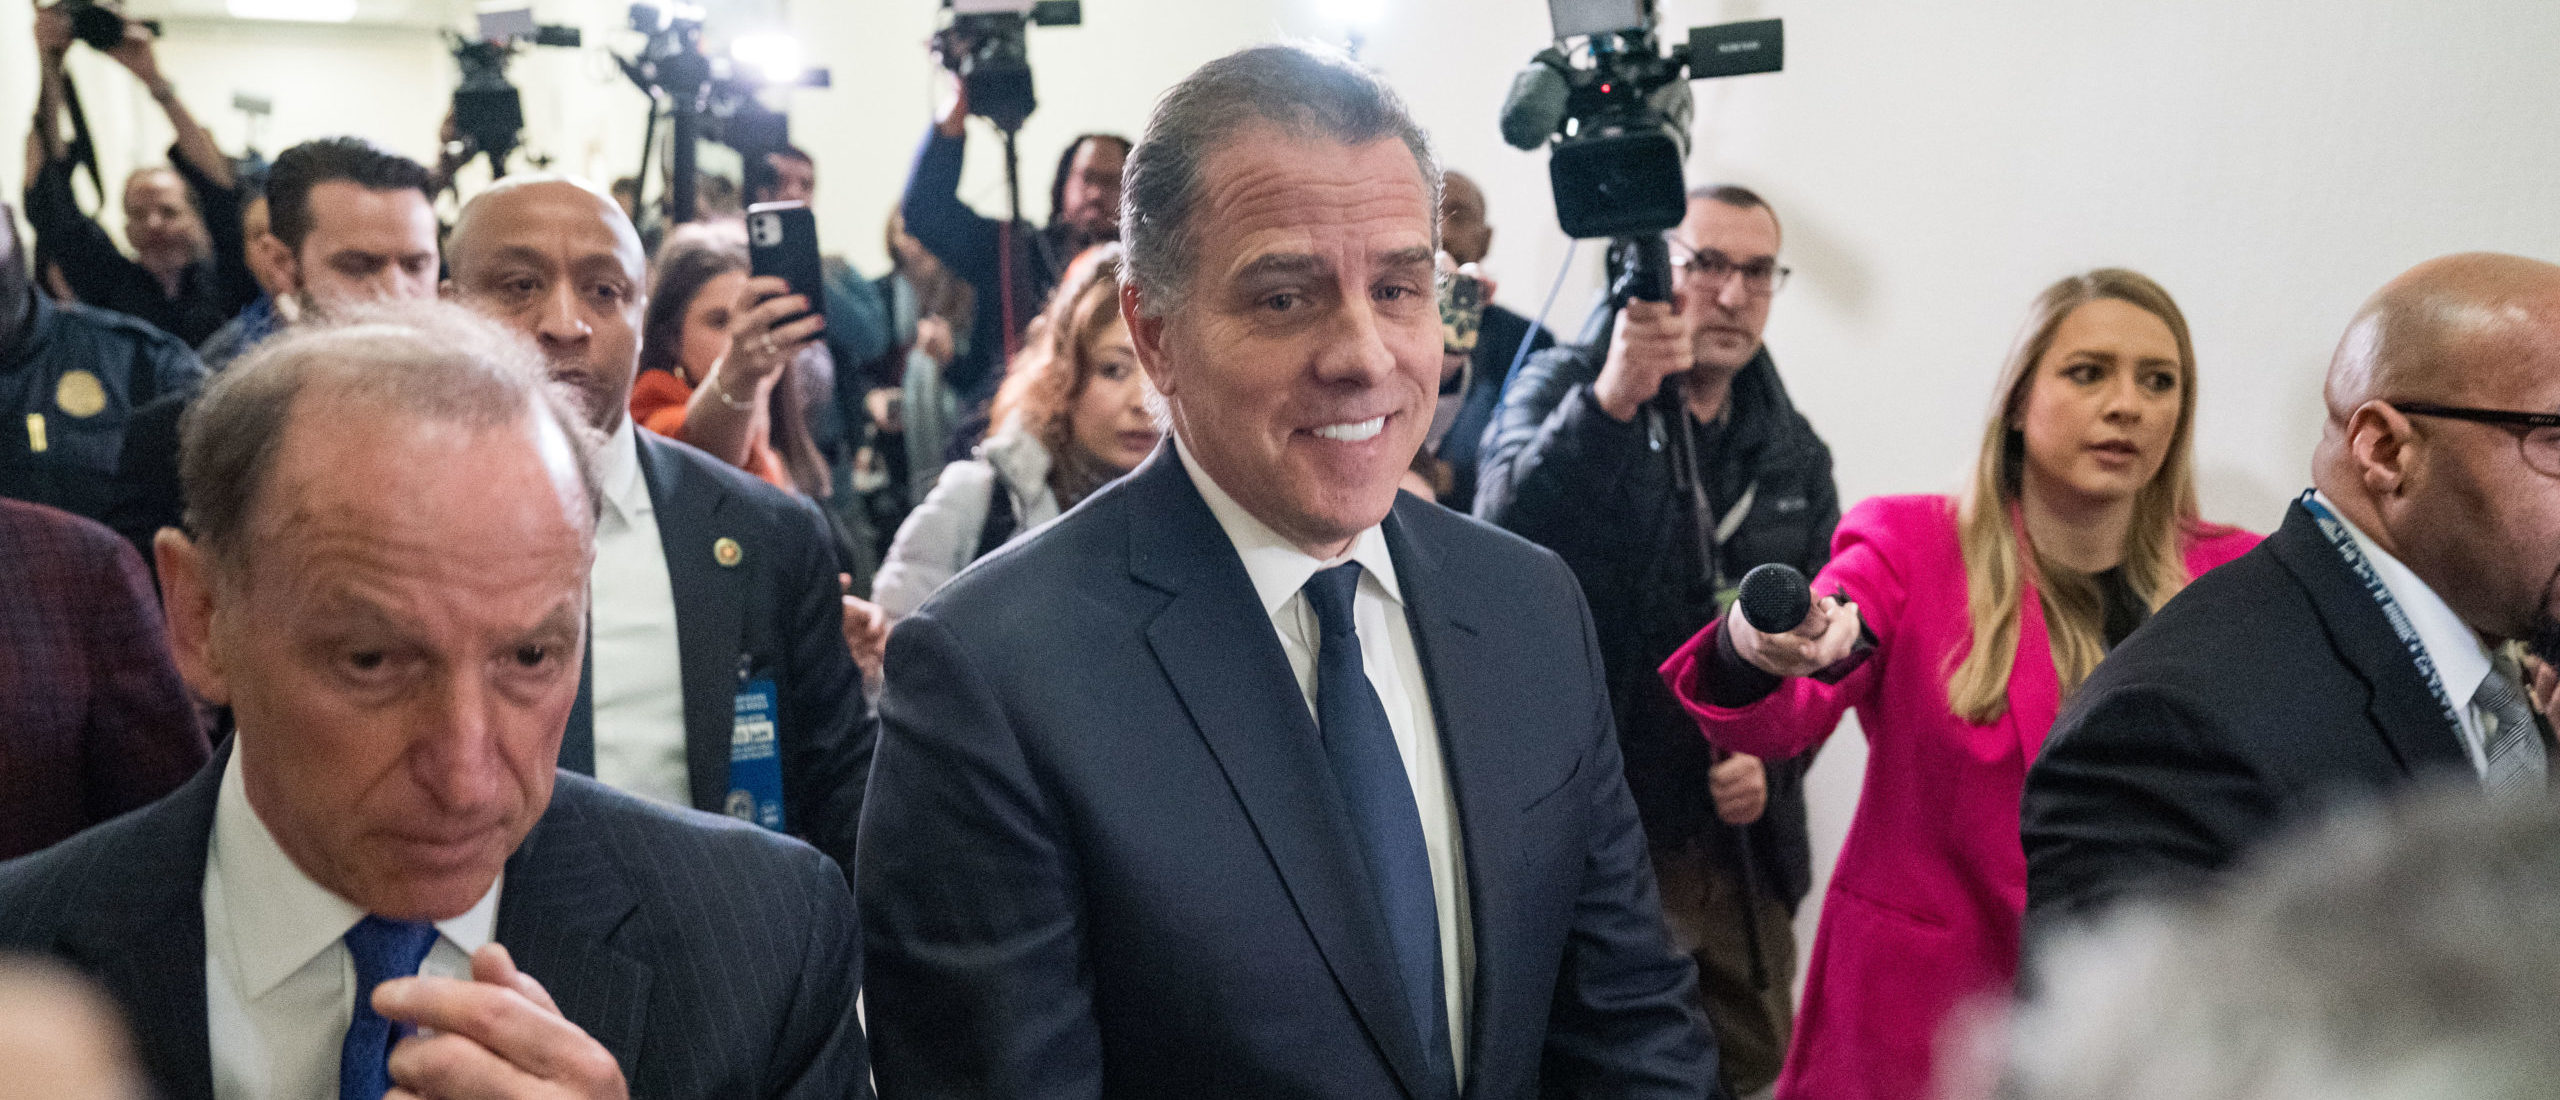 Hunter Biden, son of U.S. President Joe Biden, and his lawyer Abbe Lowell (L) depart a House Oversight Committee meeting at Capitol Hill on January 10, 2024 in Washington, DC. The committee is meeting today as it considers citing him for Contempt of Congress. (Photo by Kent Nishimura/Getty Images)